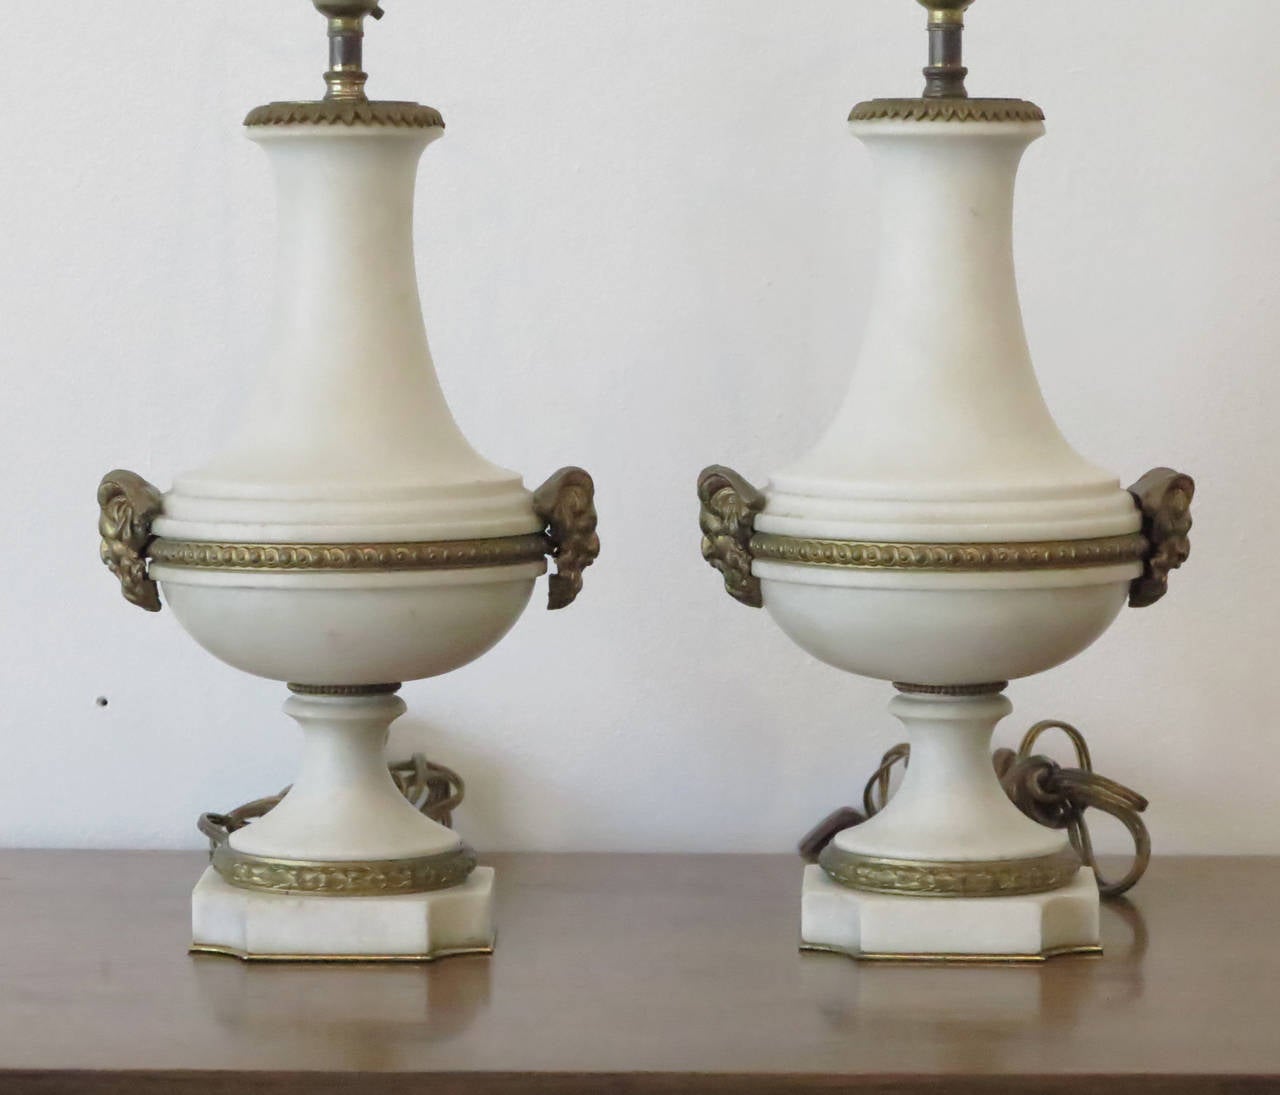 Lovely pair of neoclassical table lamps crafted in solid alabaster with elegant gilt detailing and grecian figureheads.